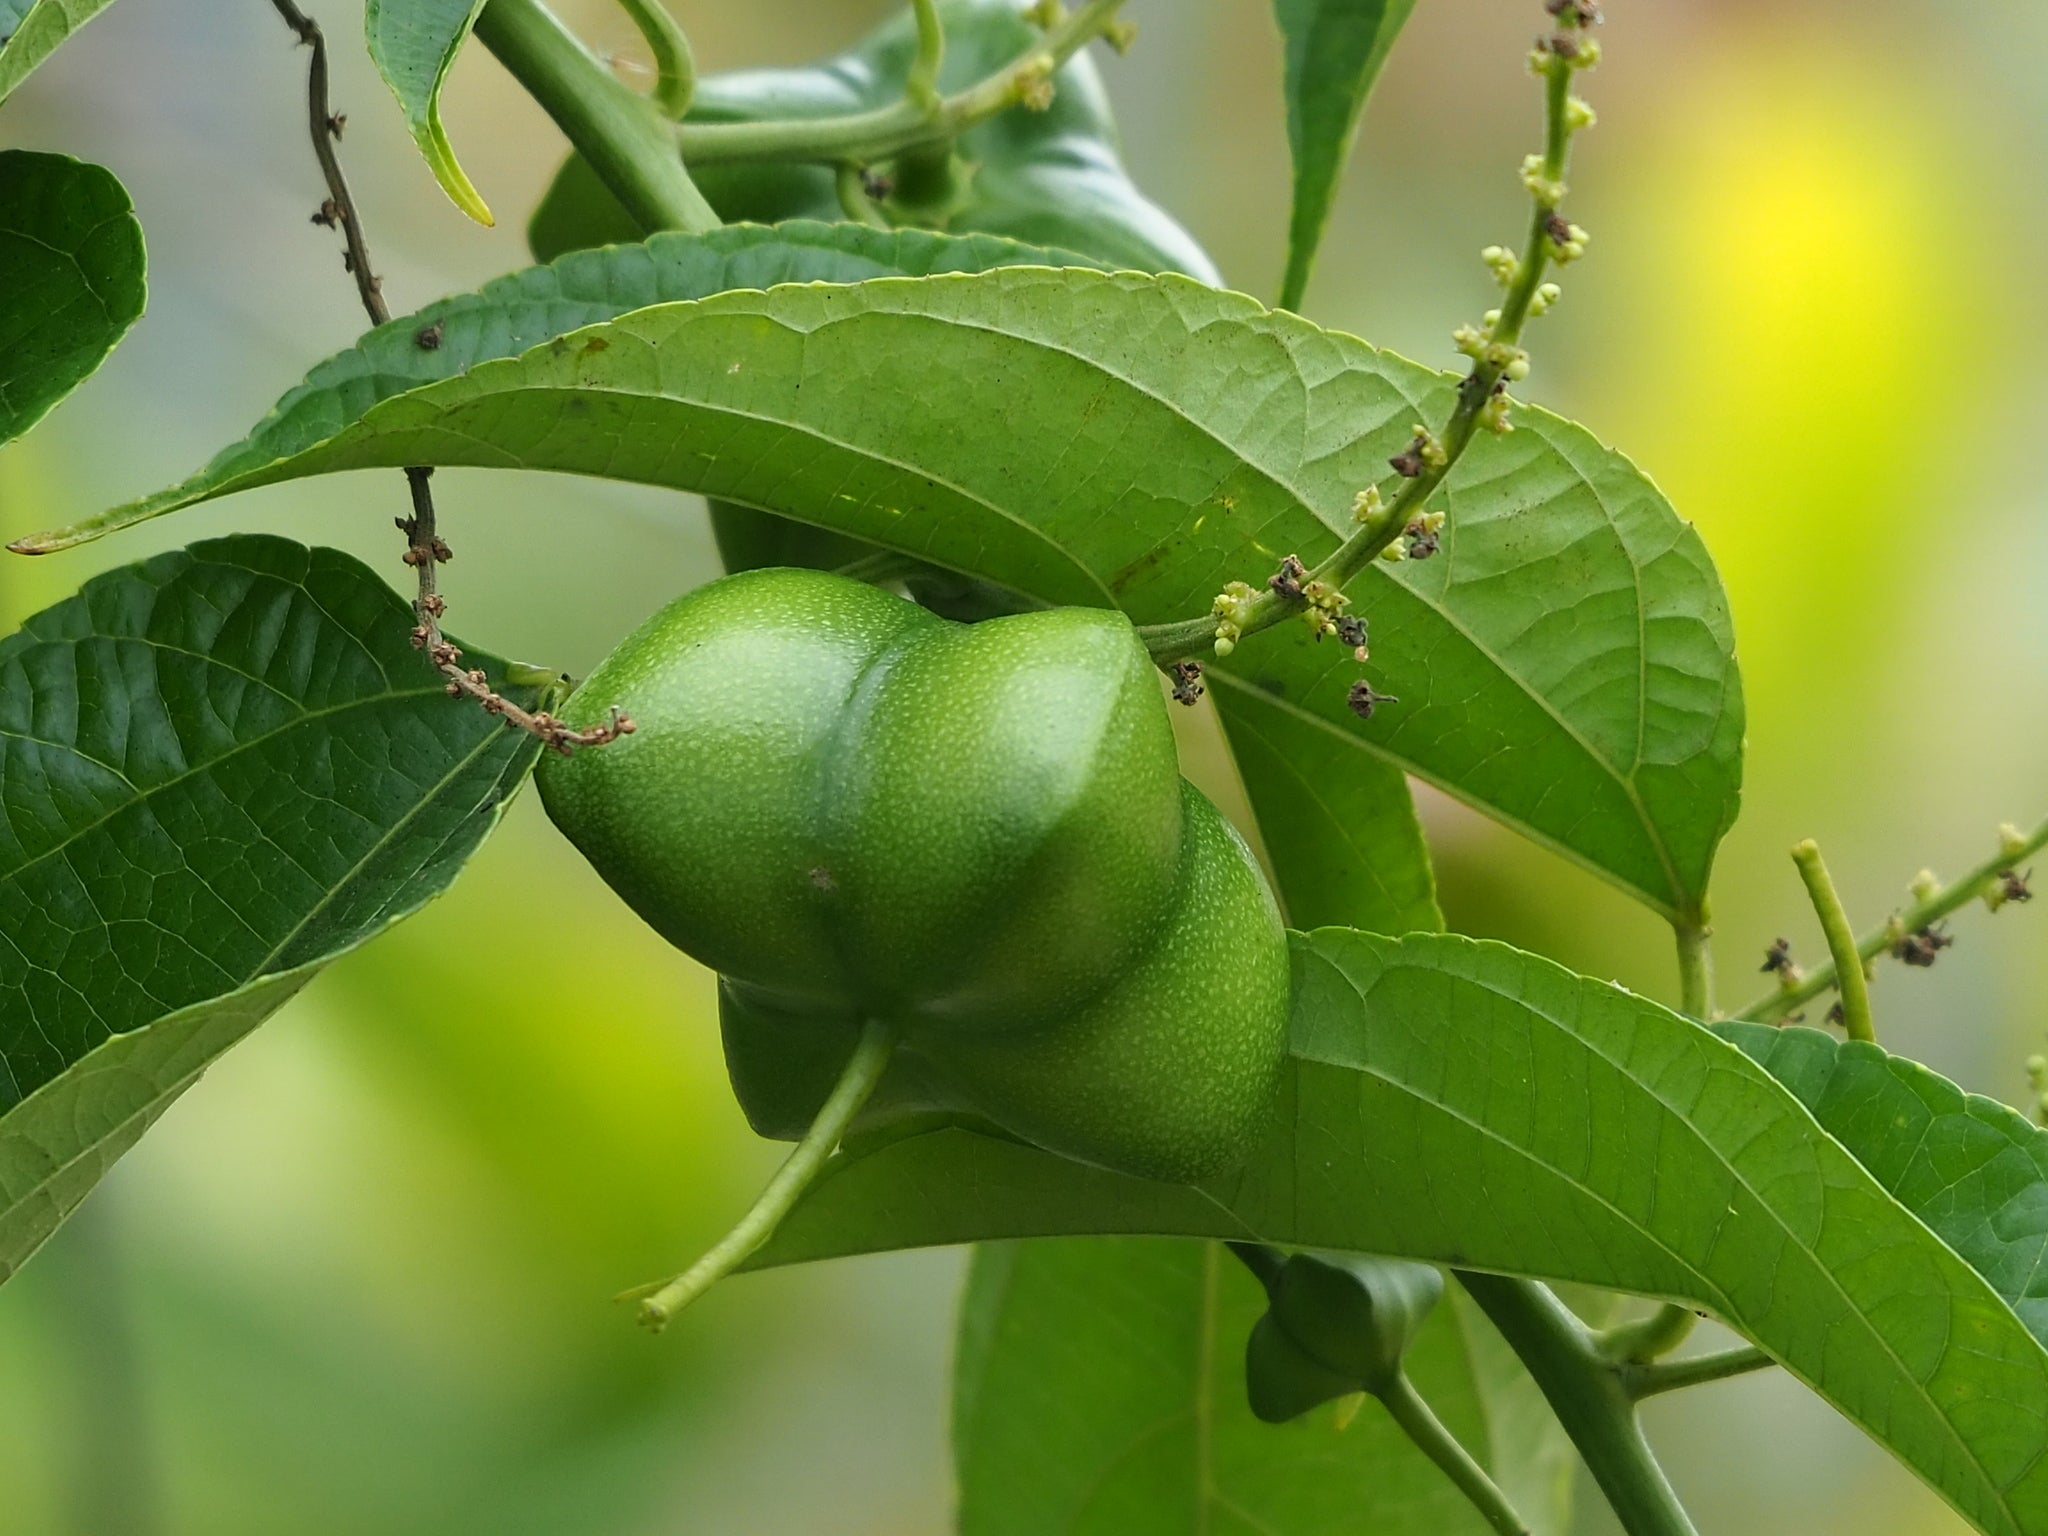 Close-up of a green Sacha Inchi plant with unripe, green, plump seed pods partially enveloped by elongated leaves. The background is blurred with hints of greenery, highlighting the plant's details.